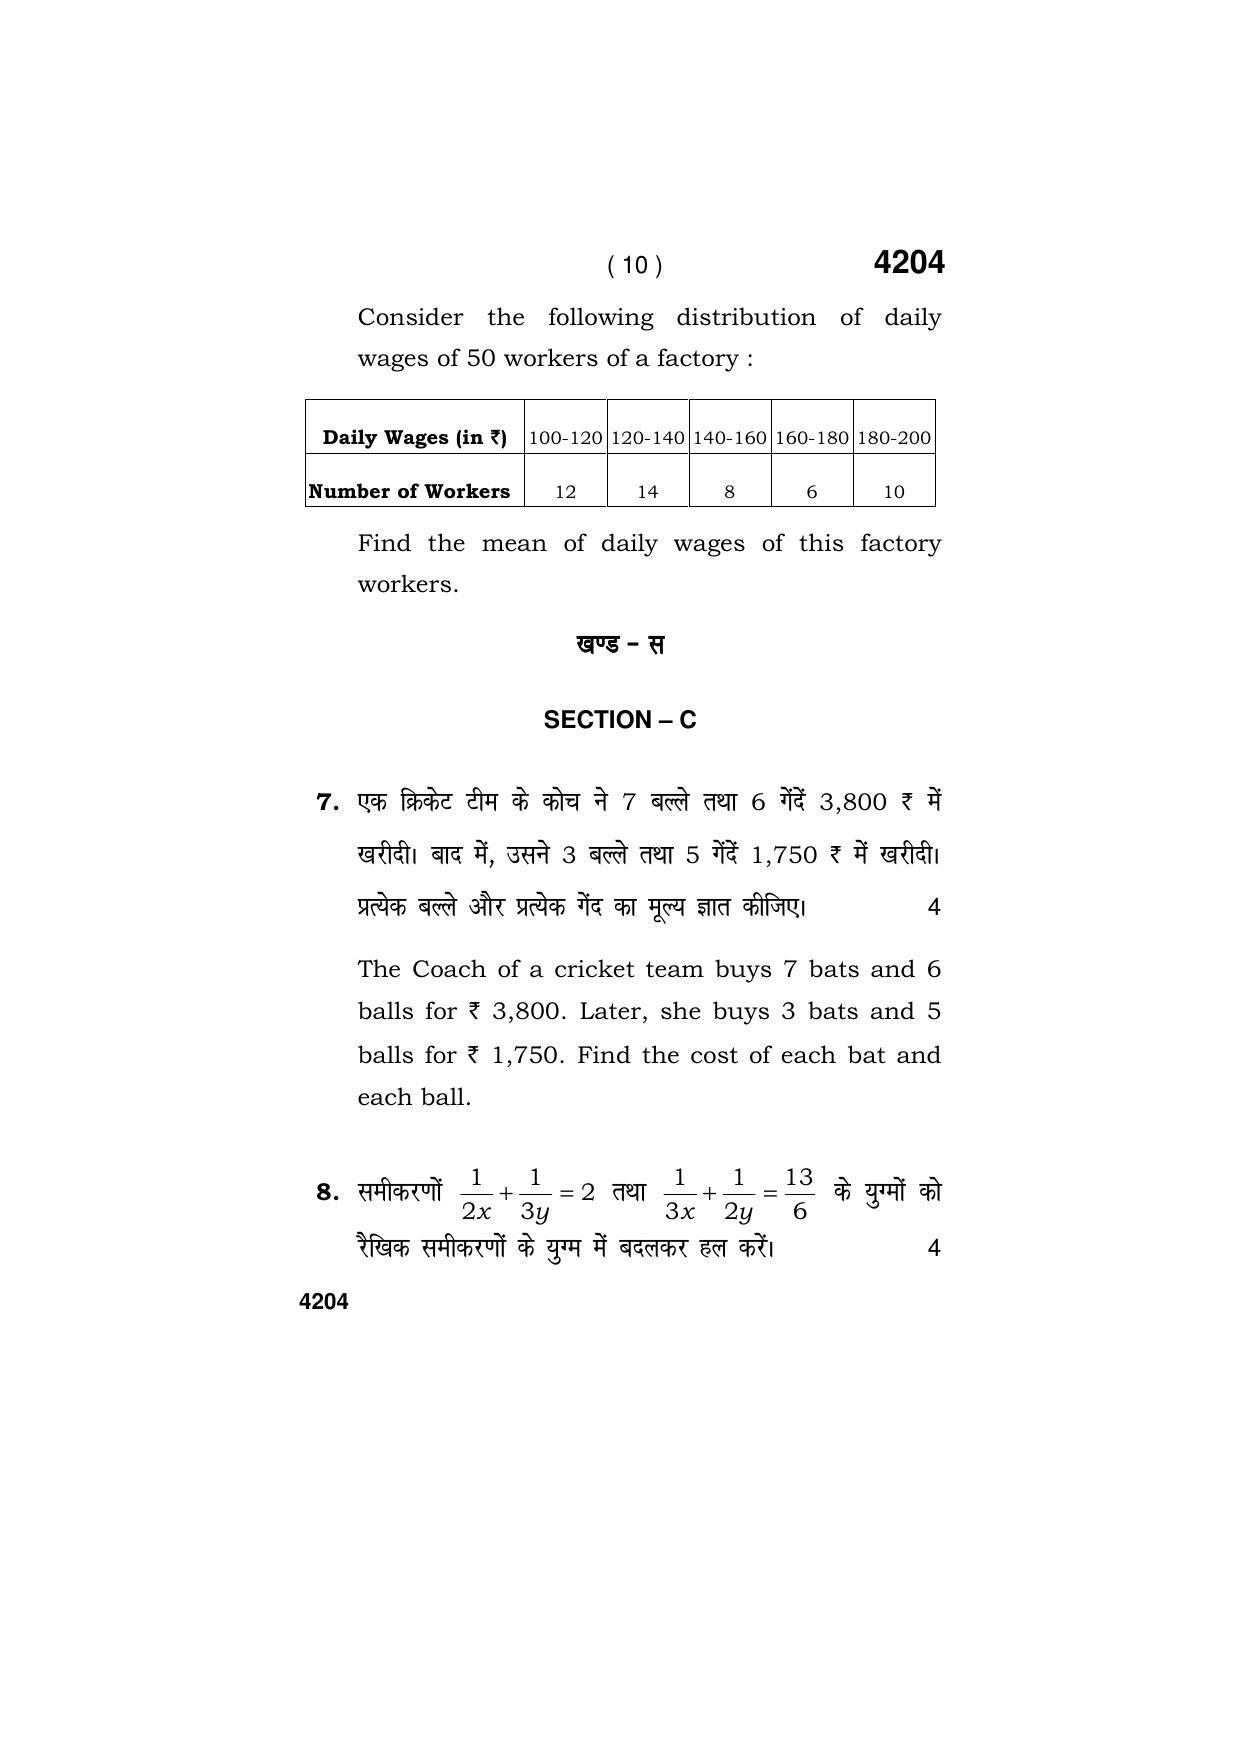 Haryana Board HBSE Class 10 Mathematics (Blind c) 2019 Question Paper - Page 10